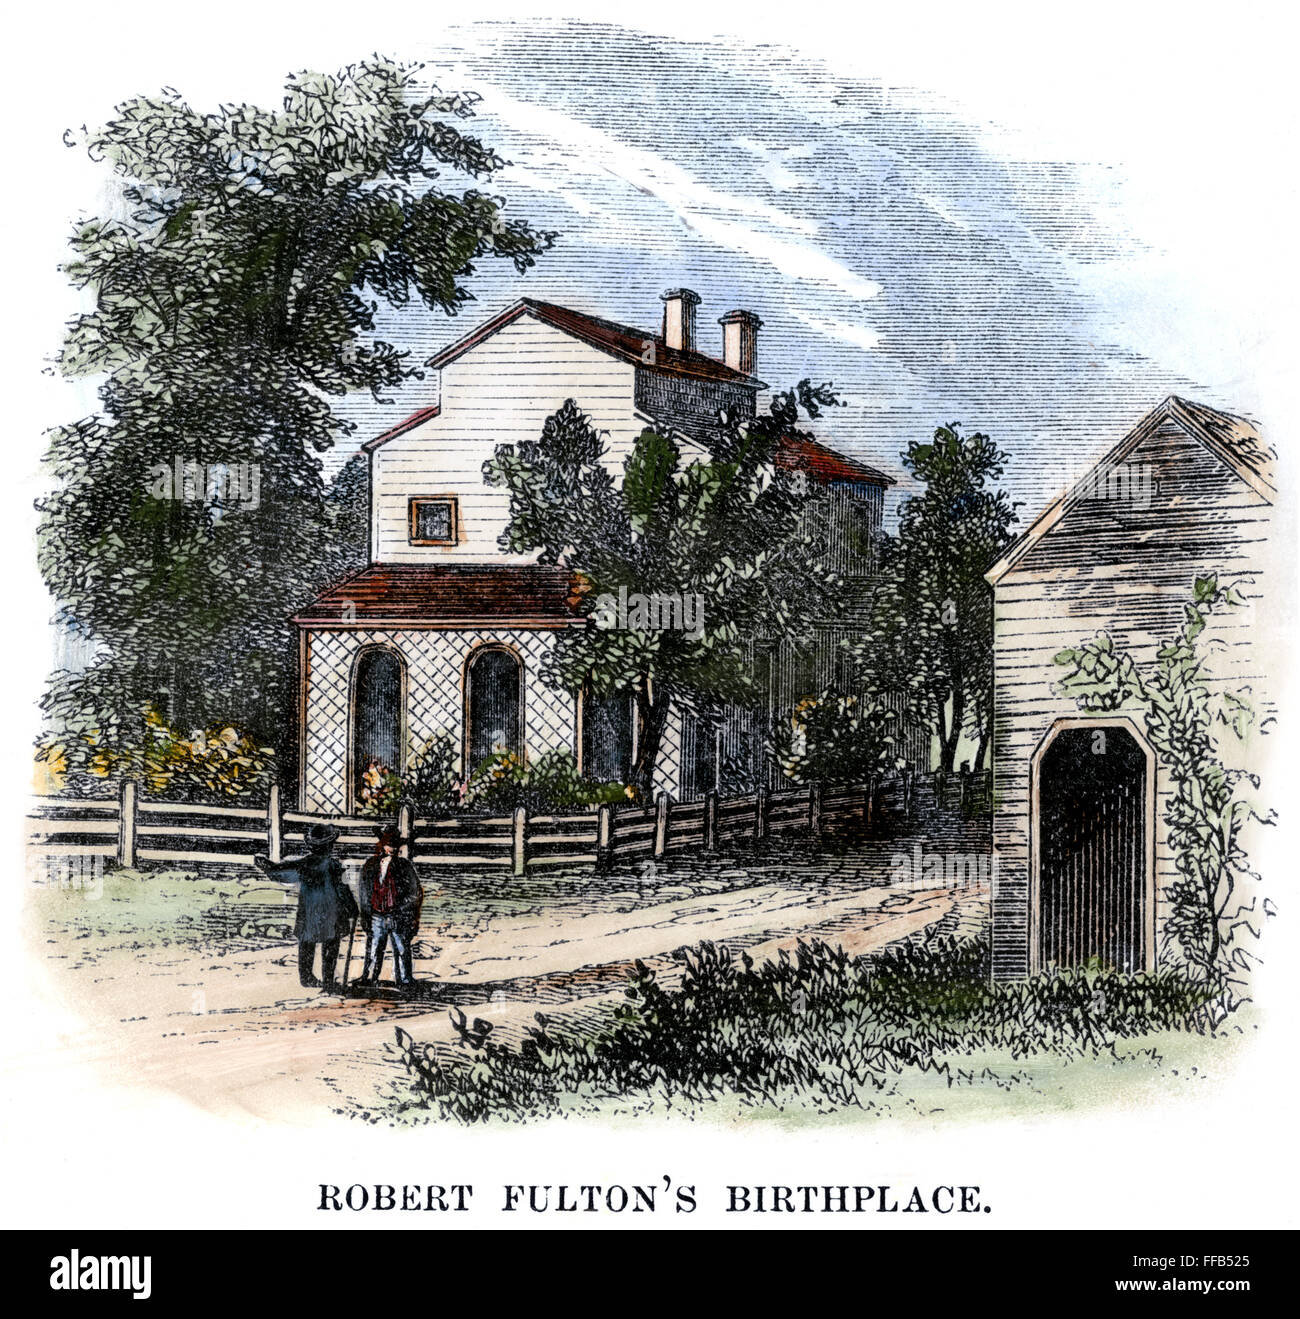 ROBERT FULTON (1765-1815). /nAmerican engineer and inventor. Fulton's birthplace in Little Britain, Lancaster county, Pennsylvania. Color engraving, 19th century. Stock Photo